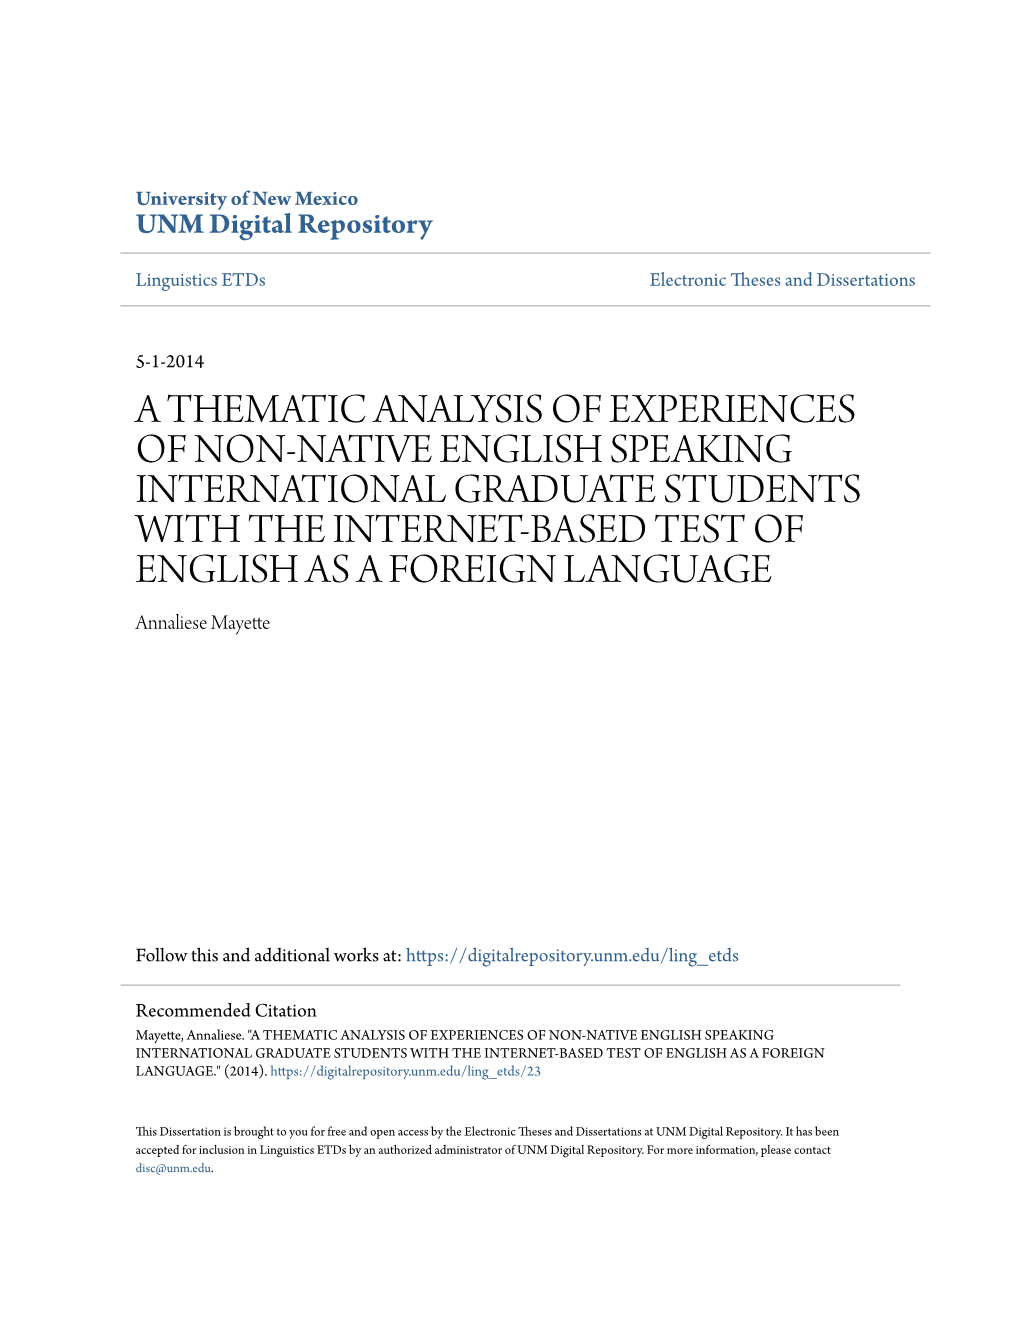 A Thematic Analysis of Experiences of Non-Native